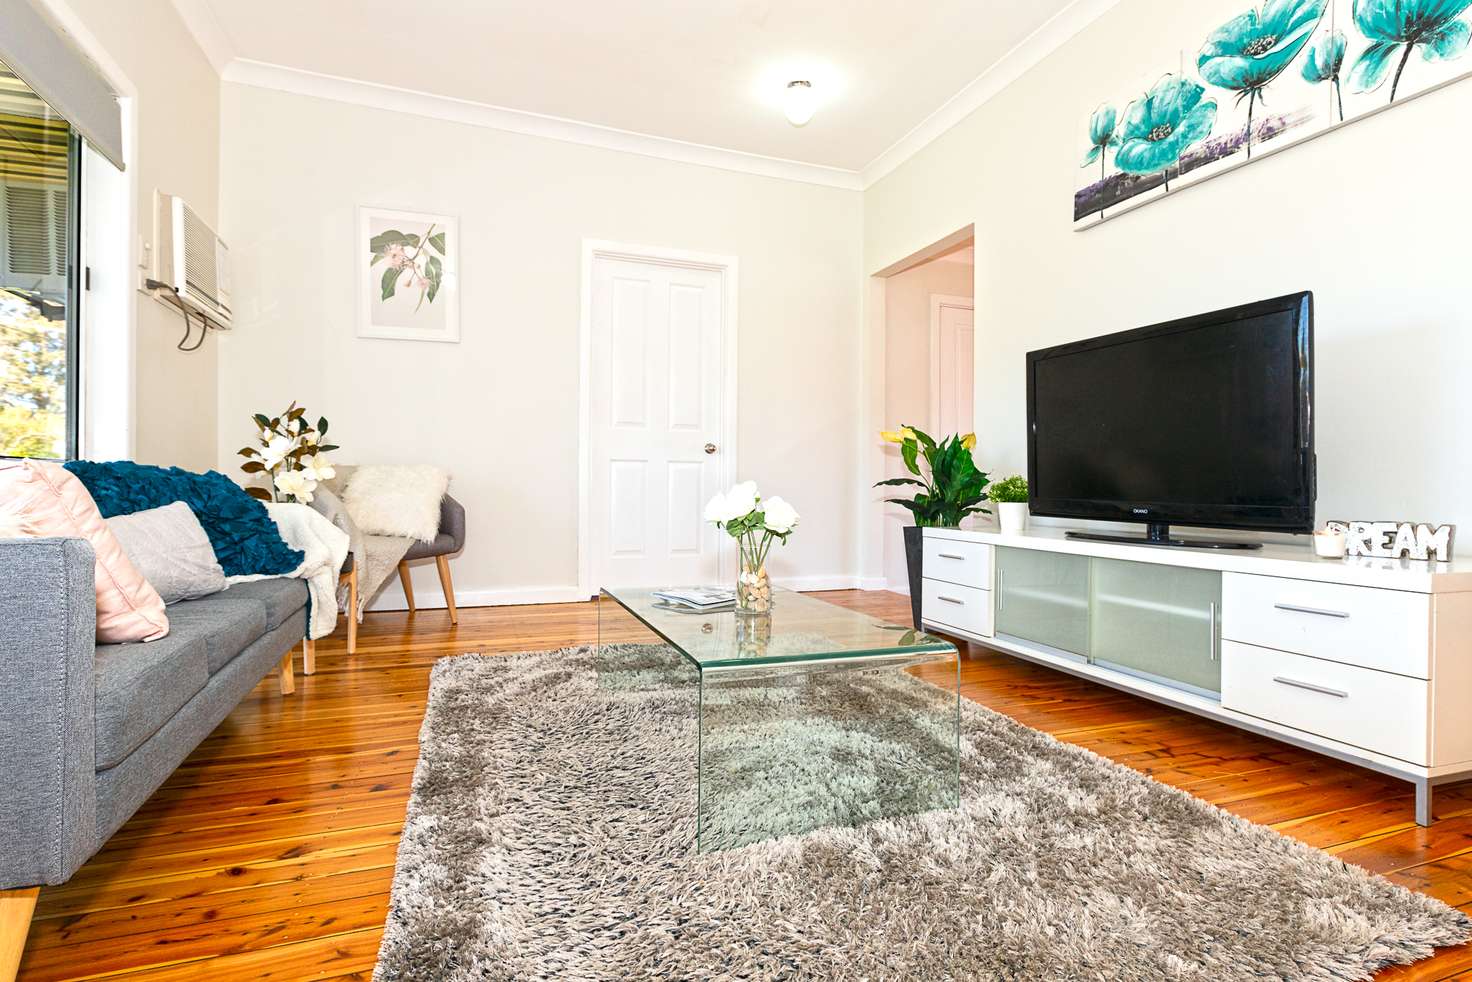 Main view of Homely house listing, 5 Eden Street, Marayong NSW 2148